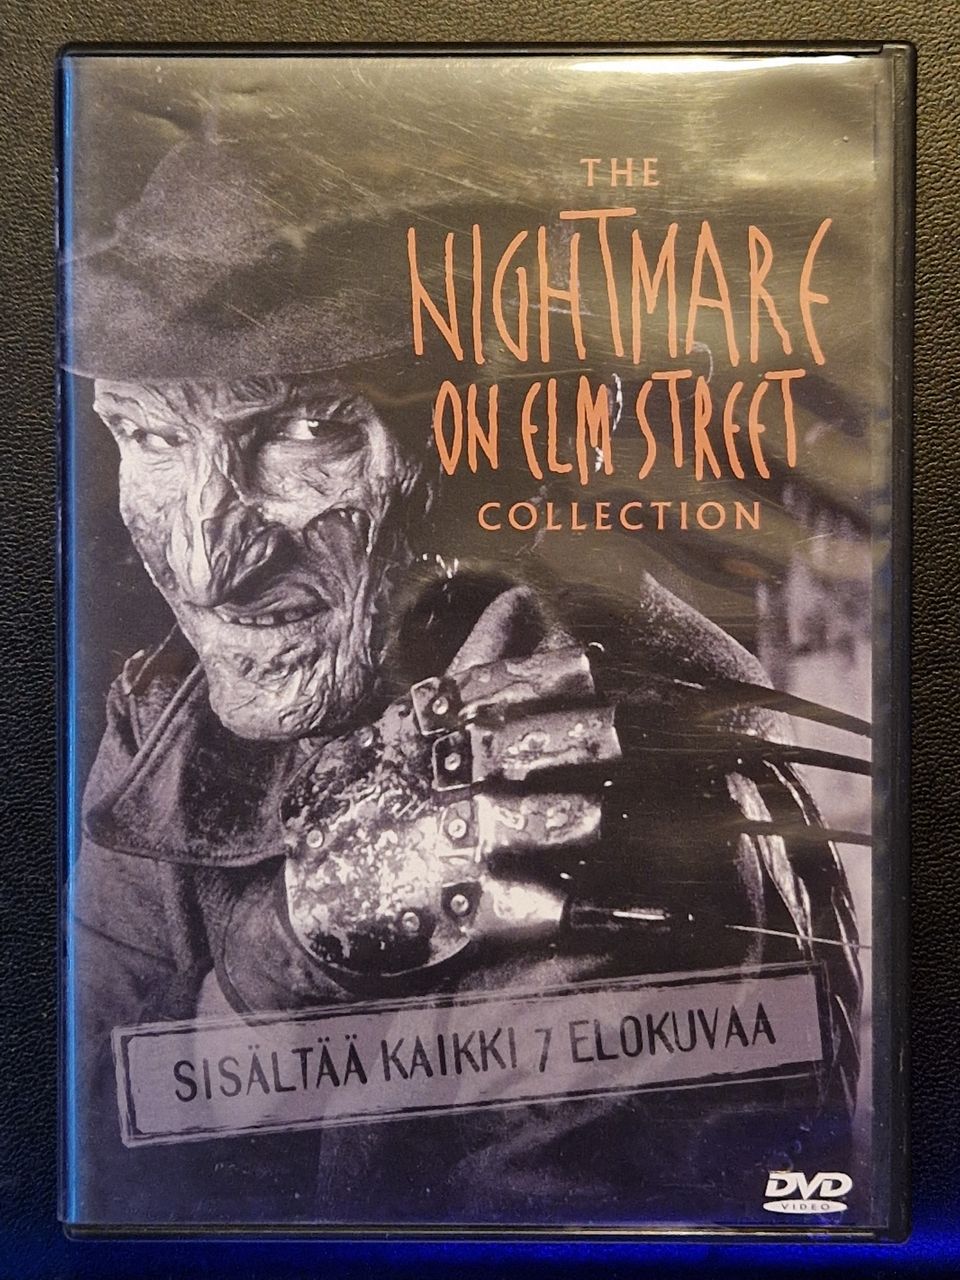 A Nightmare on Elm Street 1-7 Collection - FI DVD